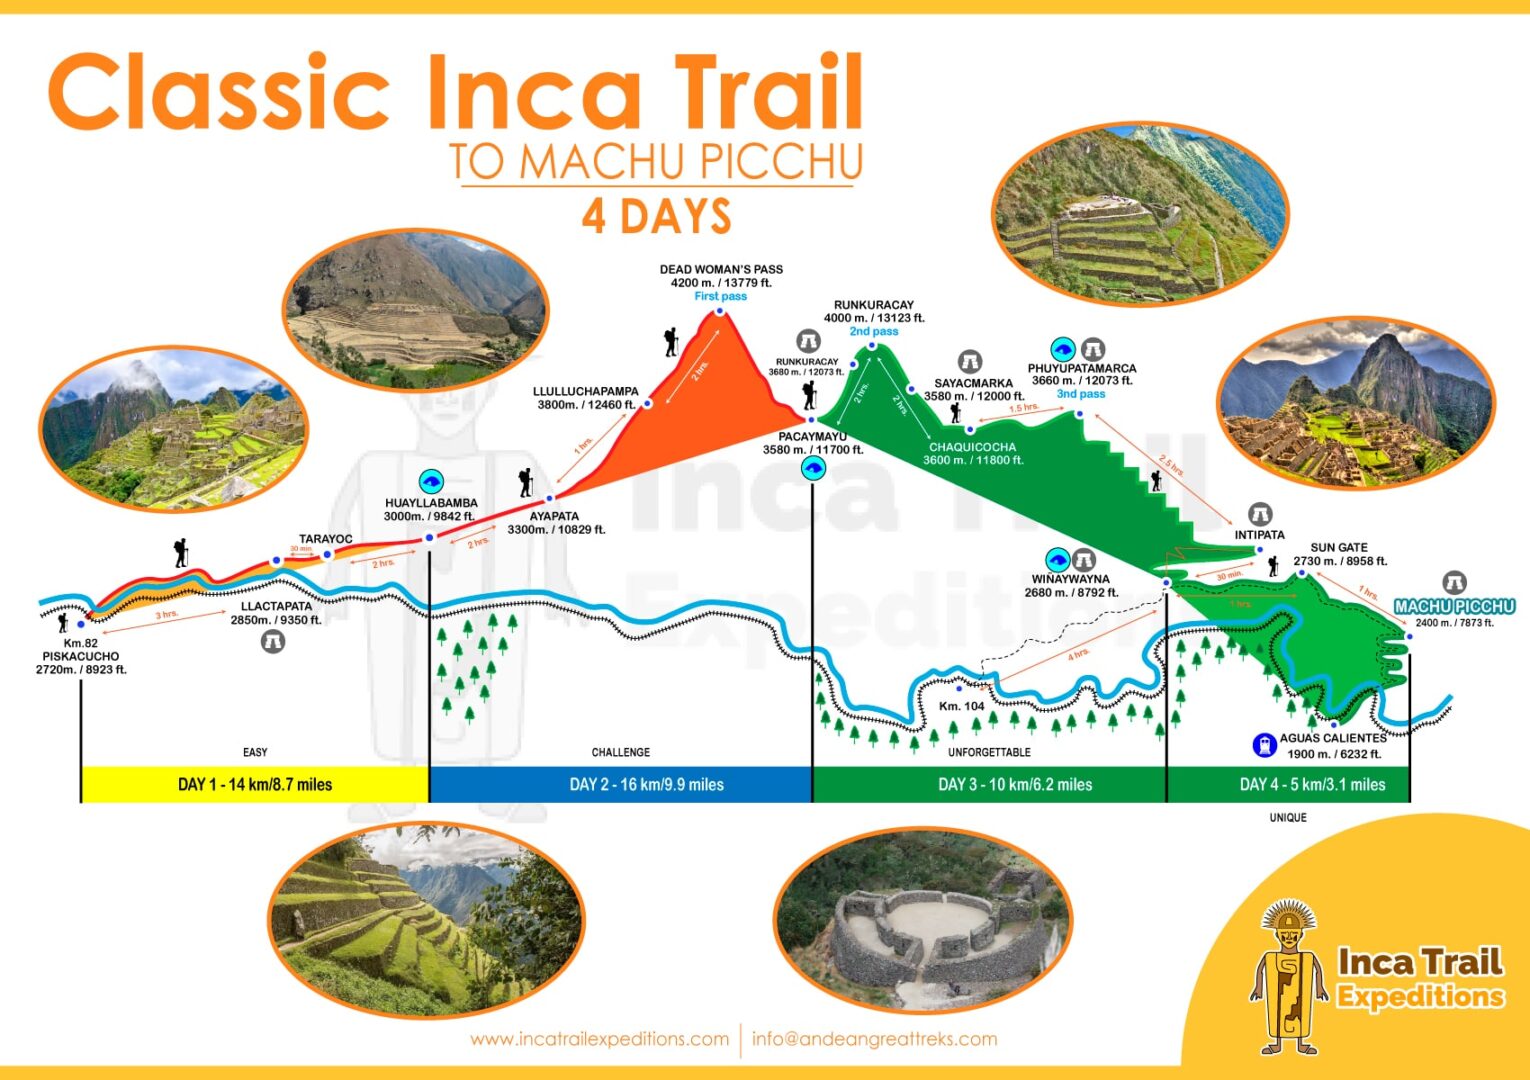 CLASSIC-INCA-TRAIL-4-DAYS-BY-INCA-TRAIL-EXPEDITIONS